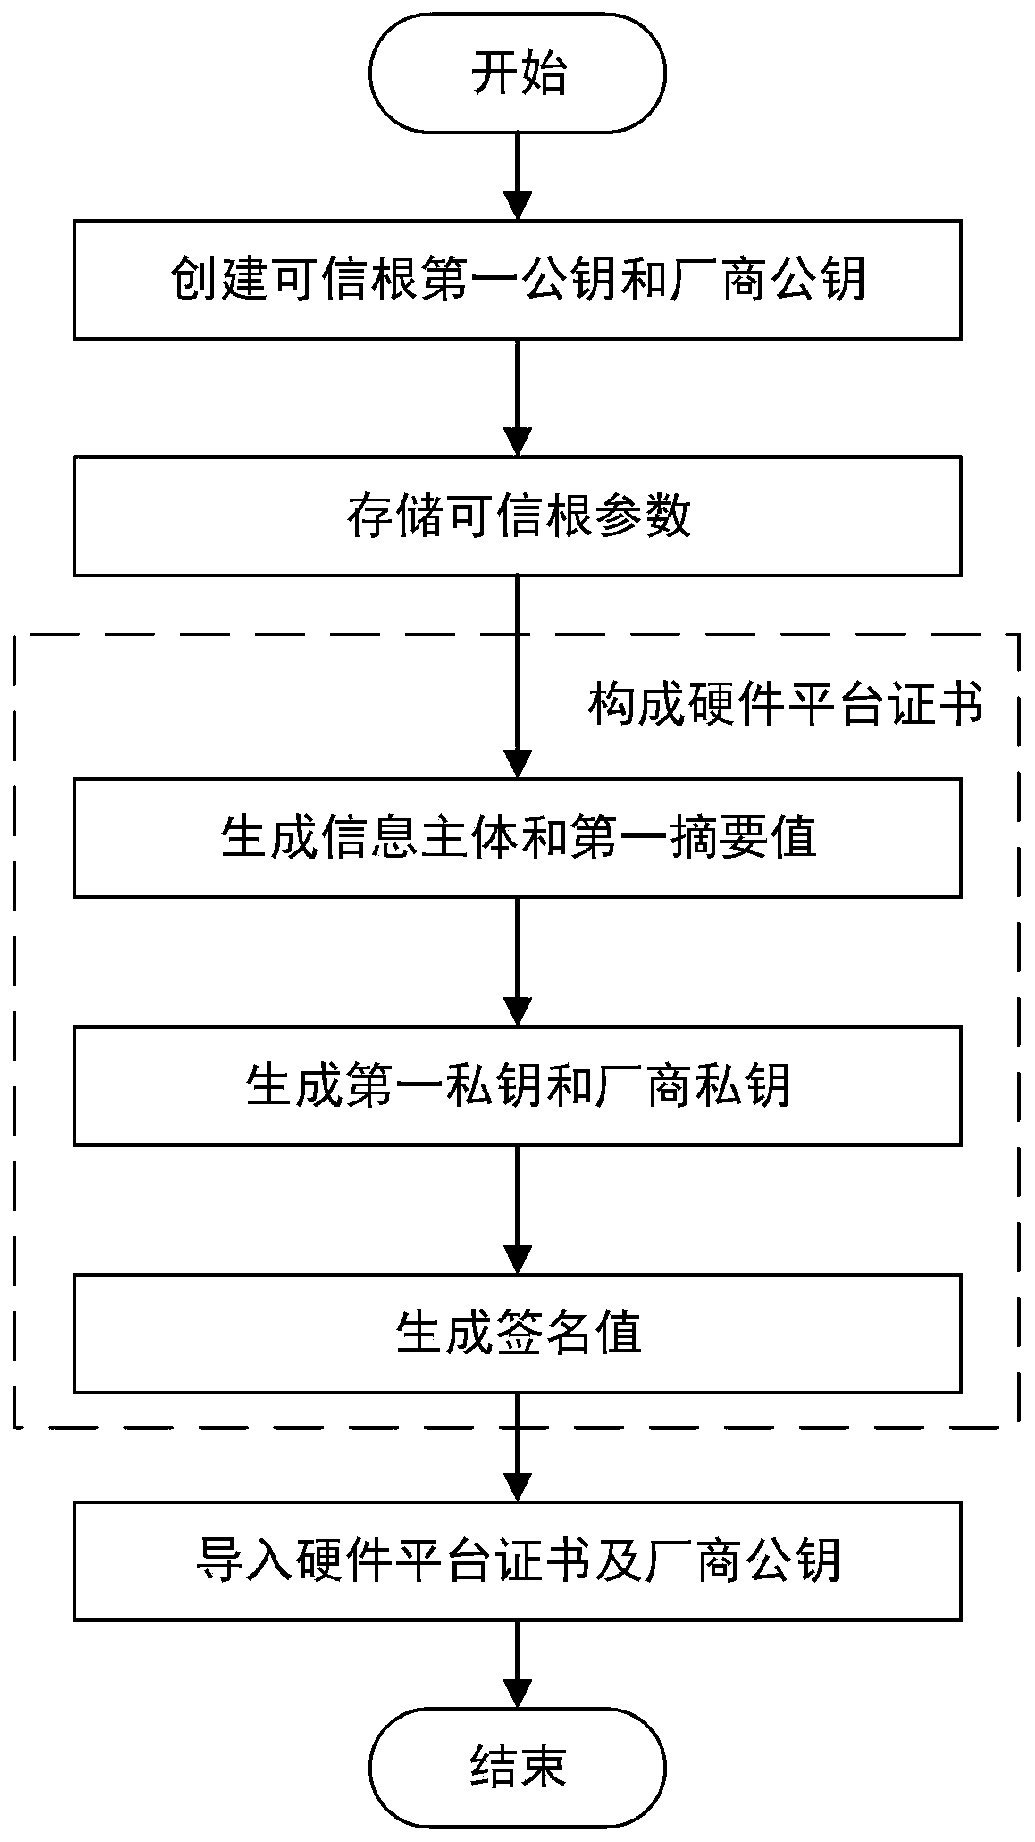 Method and system for controlling trusted root in BIOS